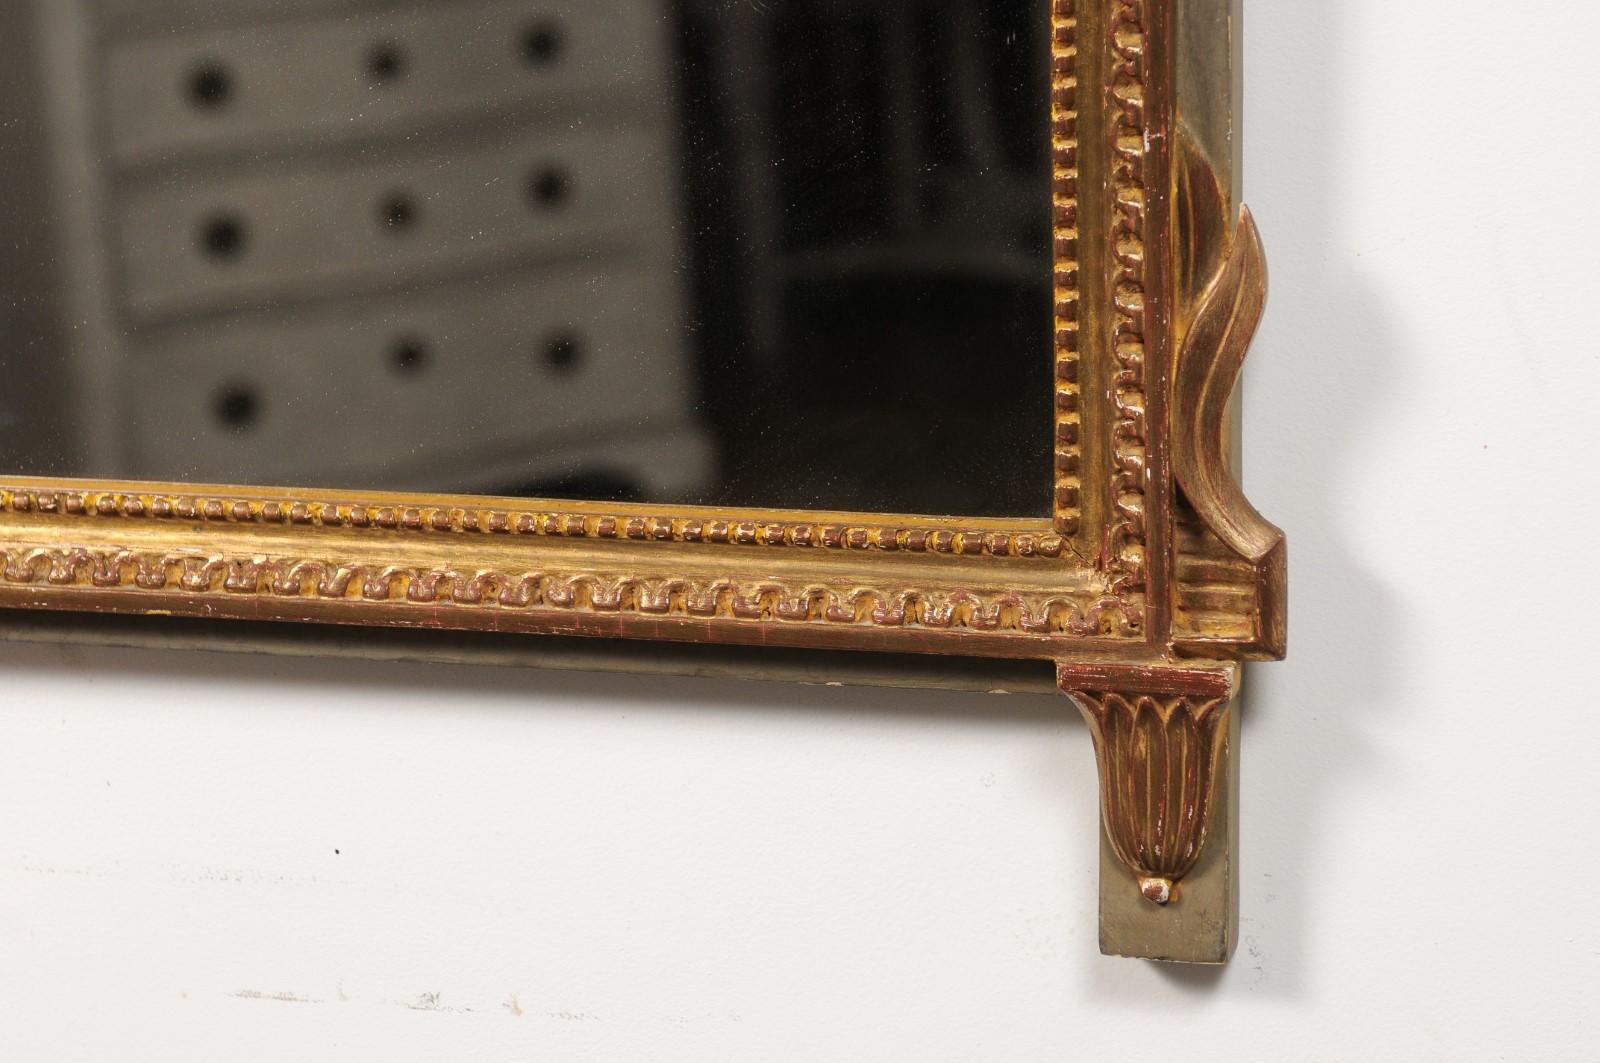 Louis XVI Style Gilt Wood Mirror with Floral Carved Medallion Crest and Tassels For Sale 3